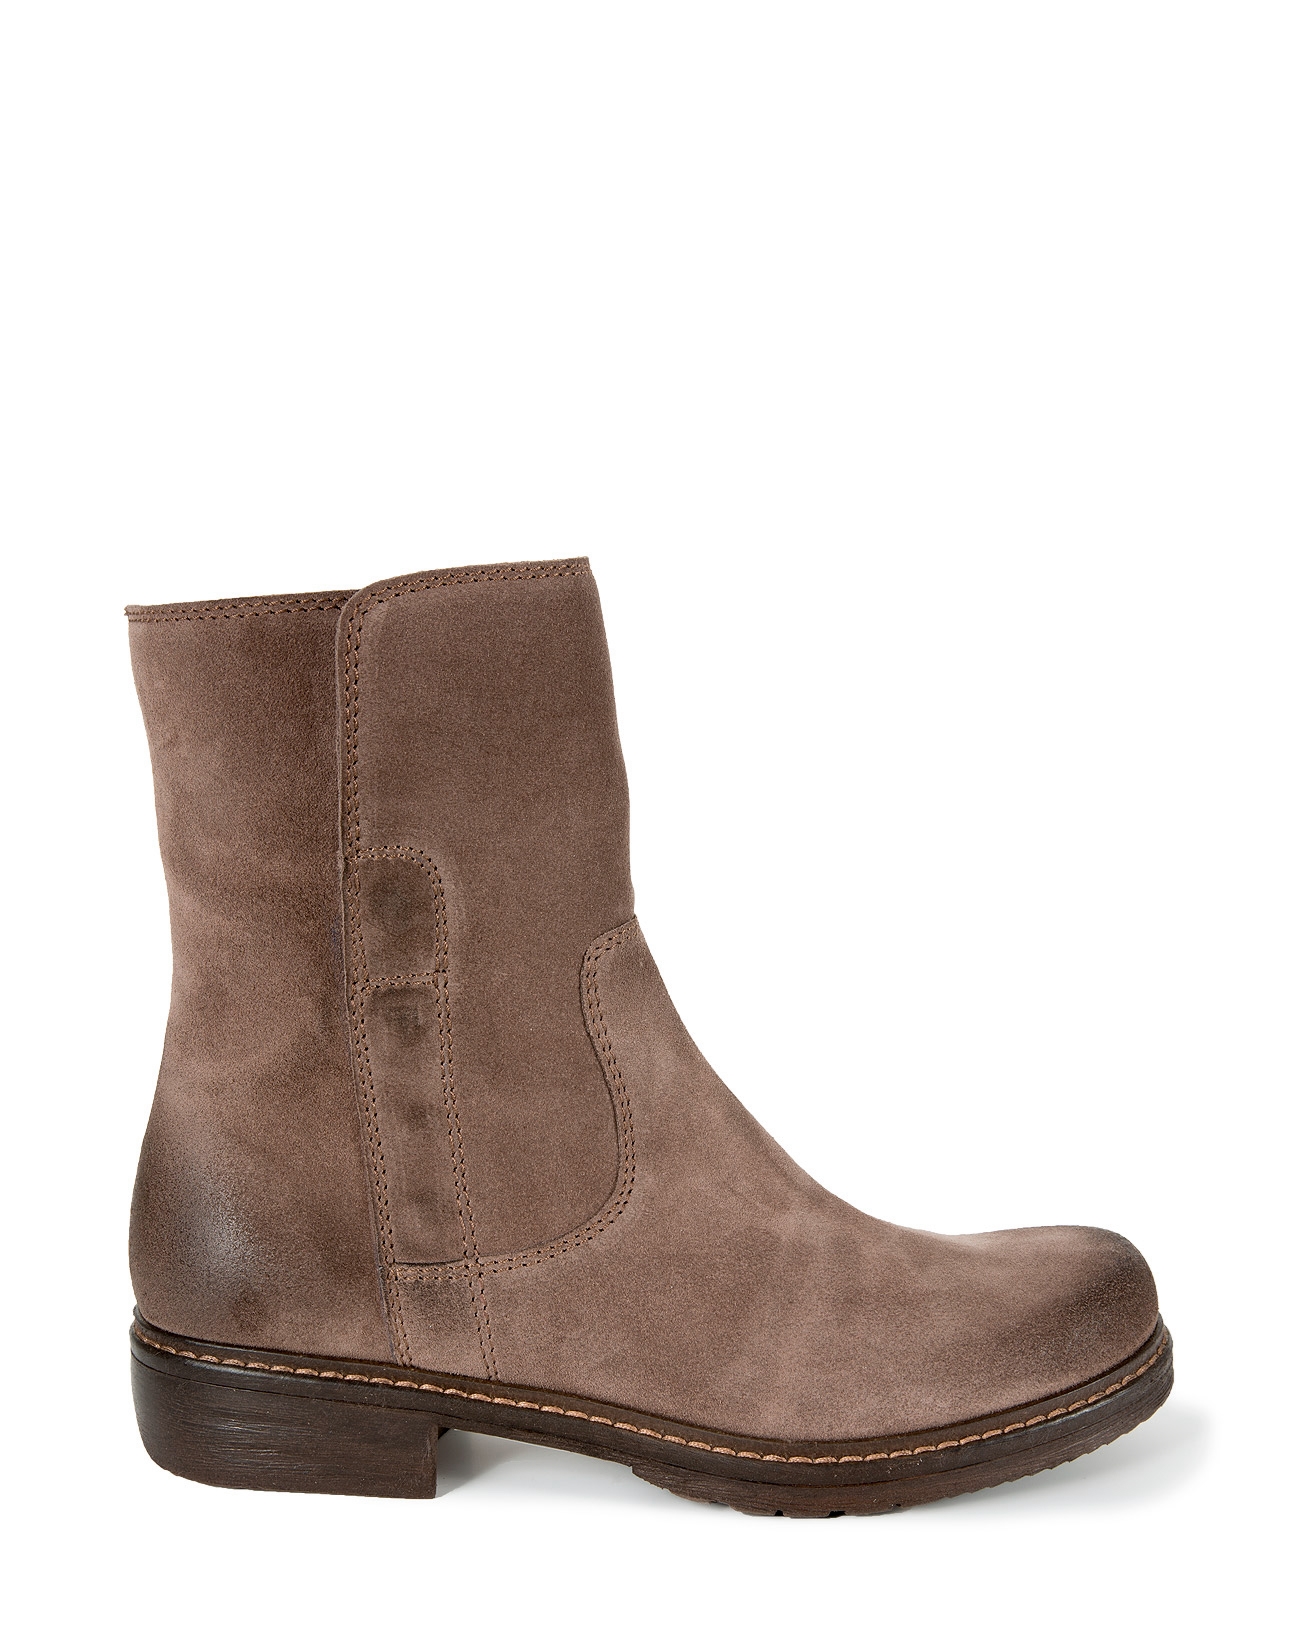 The Essential Leather Ankle Boots